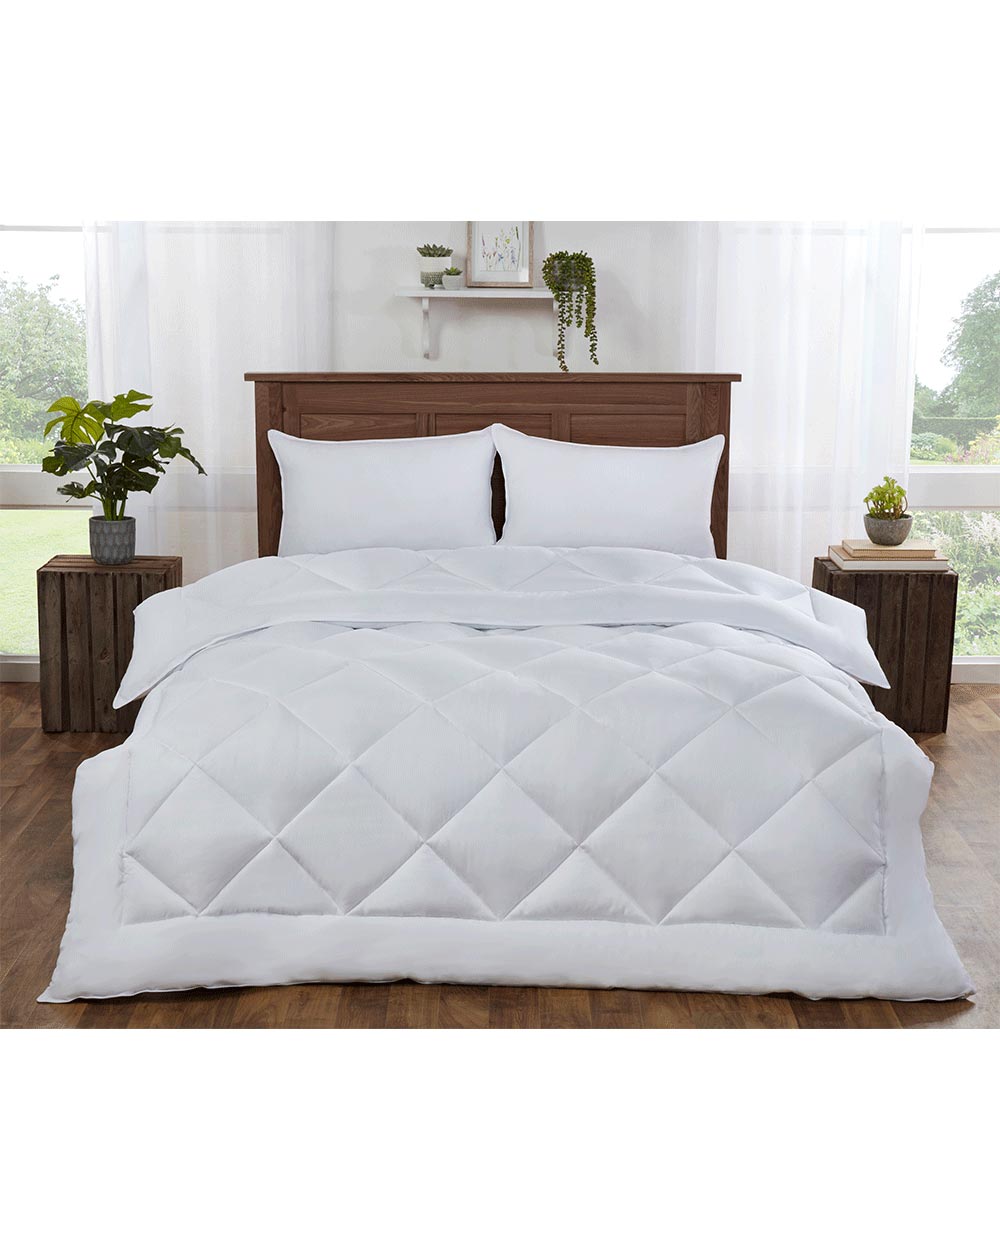 Everybody deserves a great night's sleep, this Eco Friendly Double Duvet 10.5 Tog provides that cosy feeling helping you sleep soundly.   This double duvet fits any standard size double bed comfortably. Measuring 200 cm x 200 cm this duvet gives just the right amount of drape for maximum comfort.